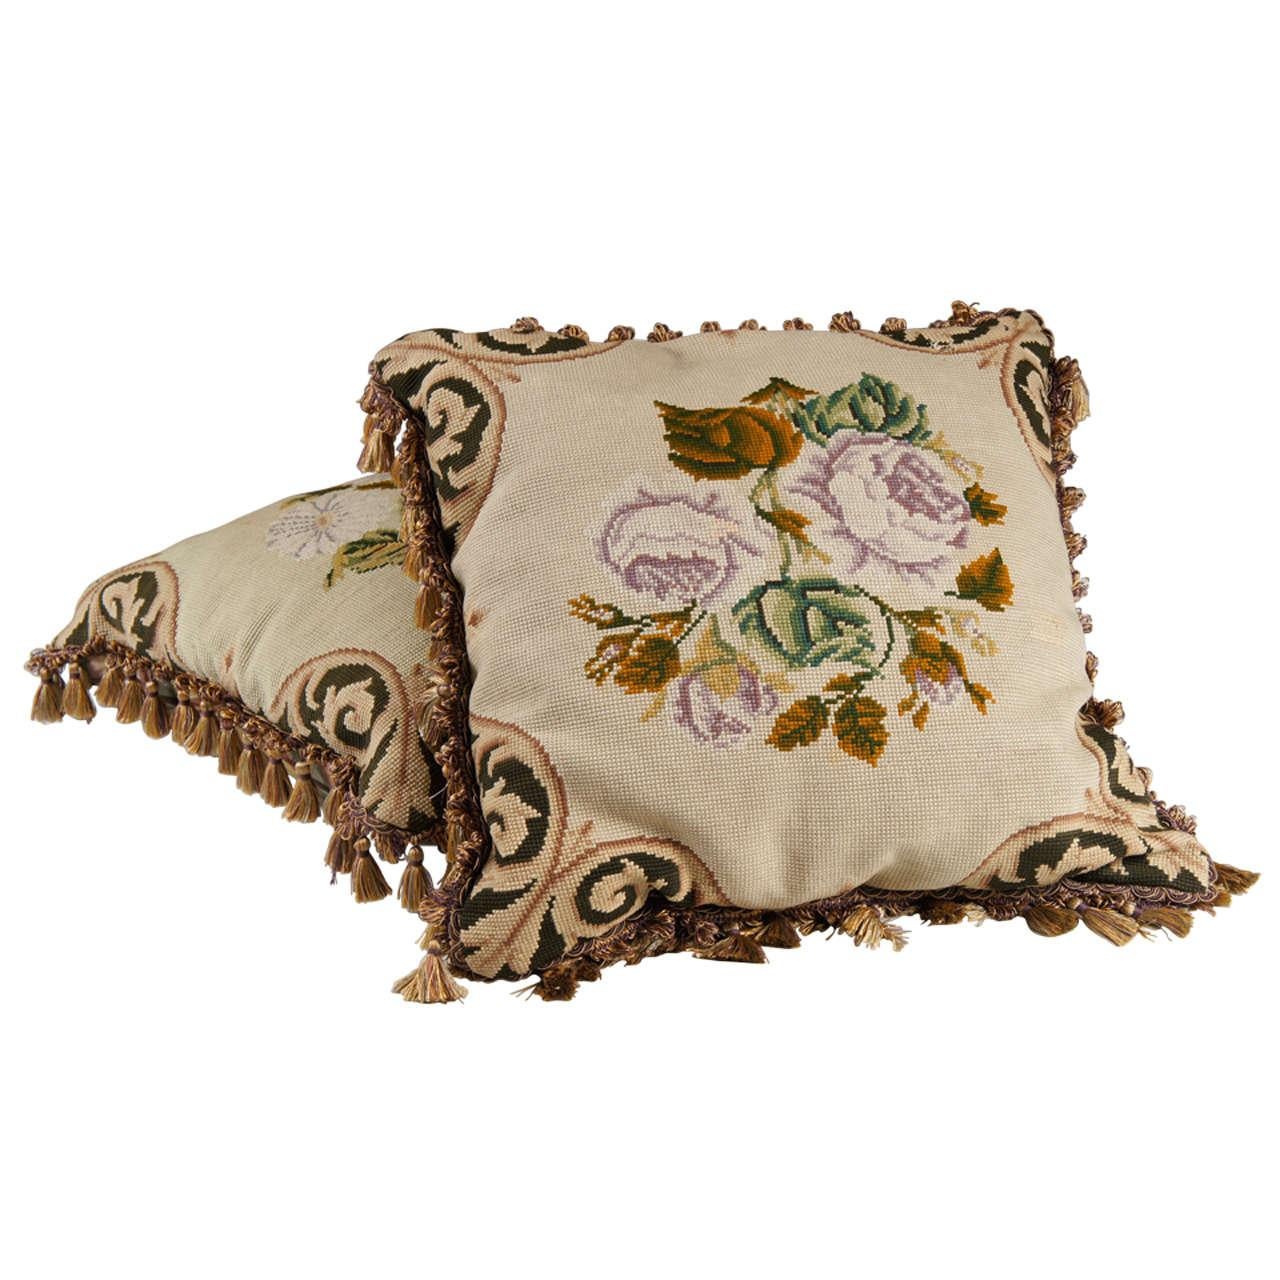 Pair of Floral Embroidered Needlepoint Pillows For Sale